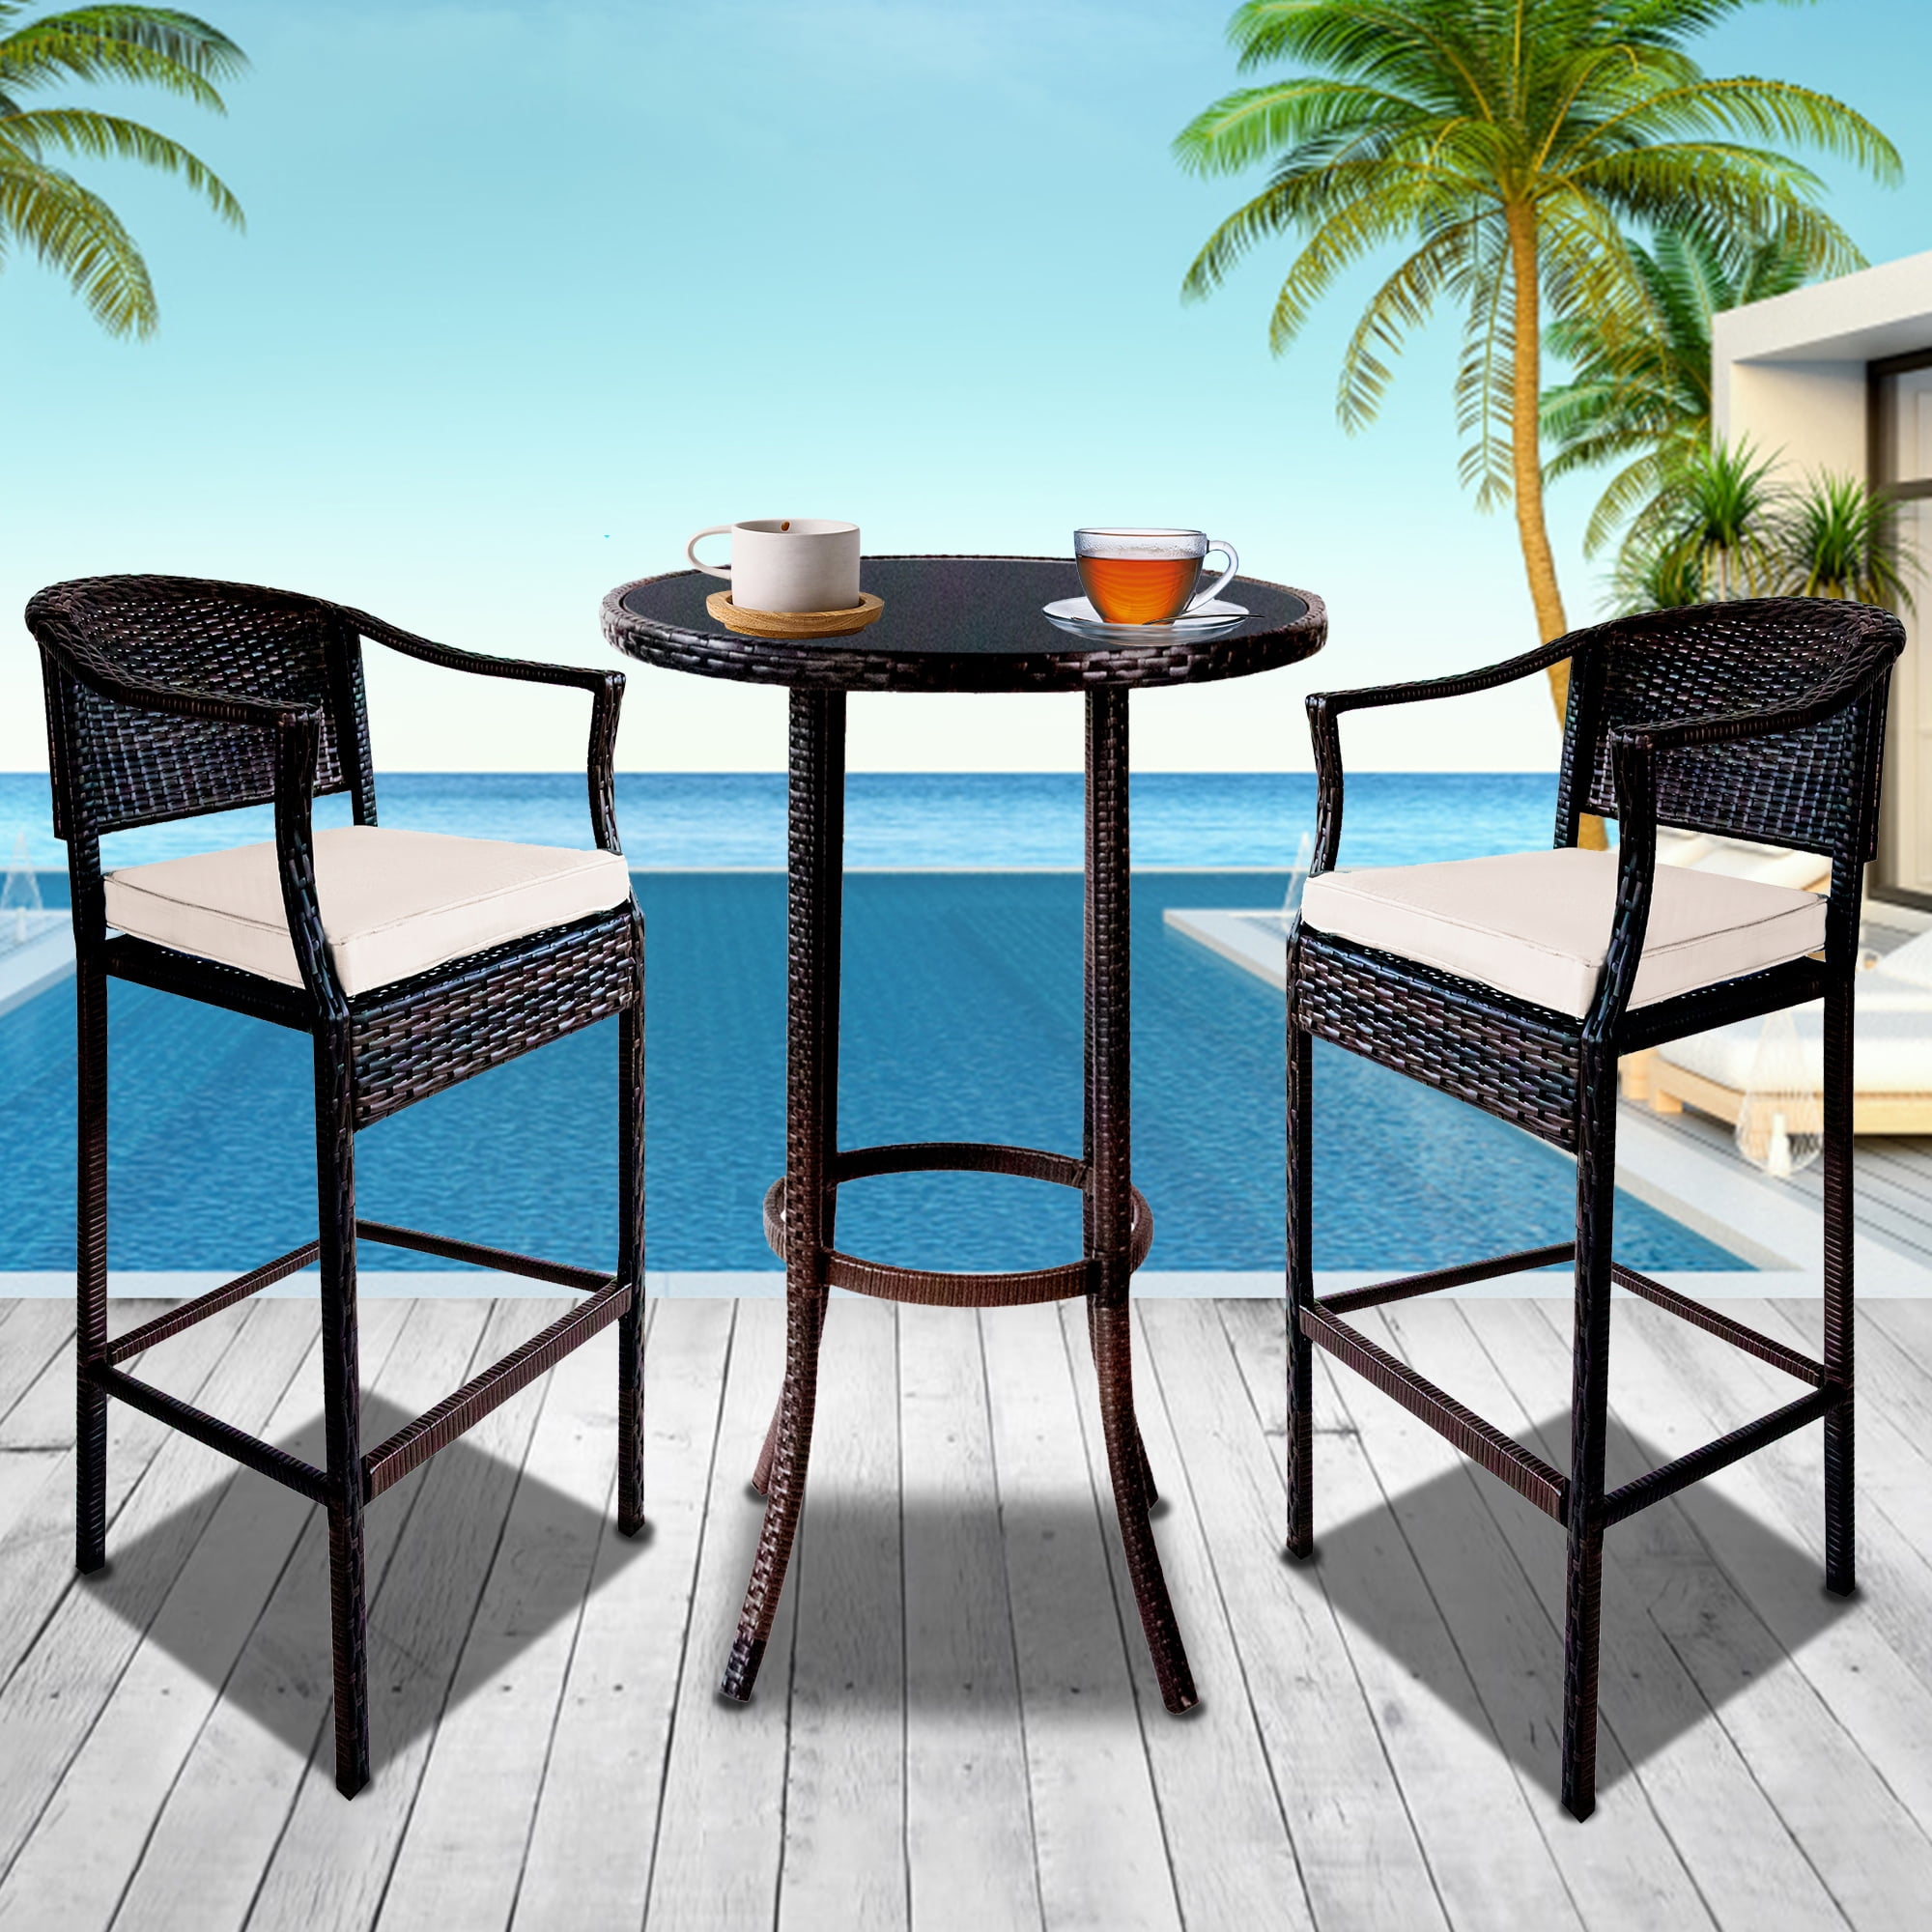 Sundale Outdoor 3-Piece Wicker Bar Stools & Bar Table Set 2 Stools & 1 Table Rattan Patio Furniture Sets with Cusions & Strip Lumbars 